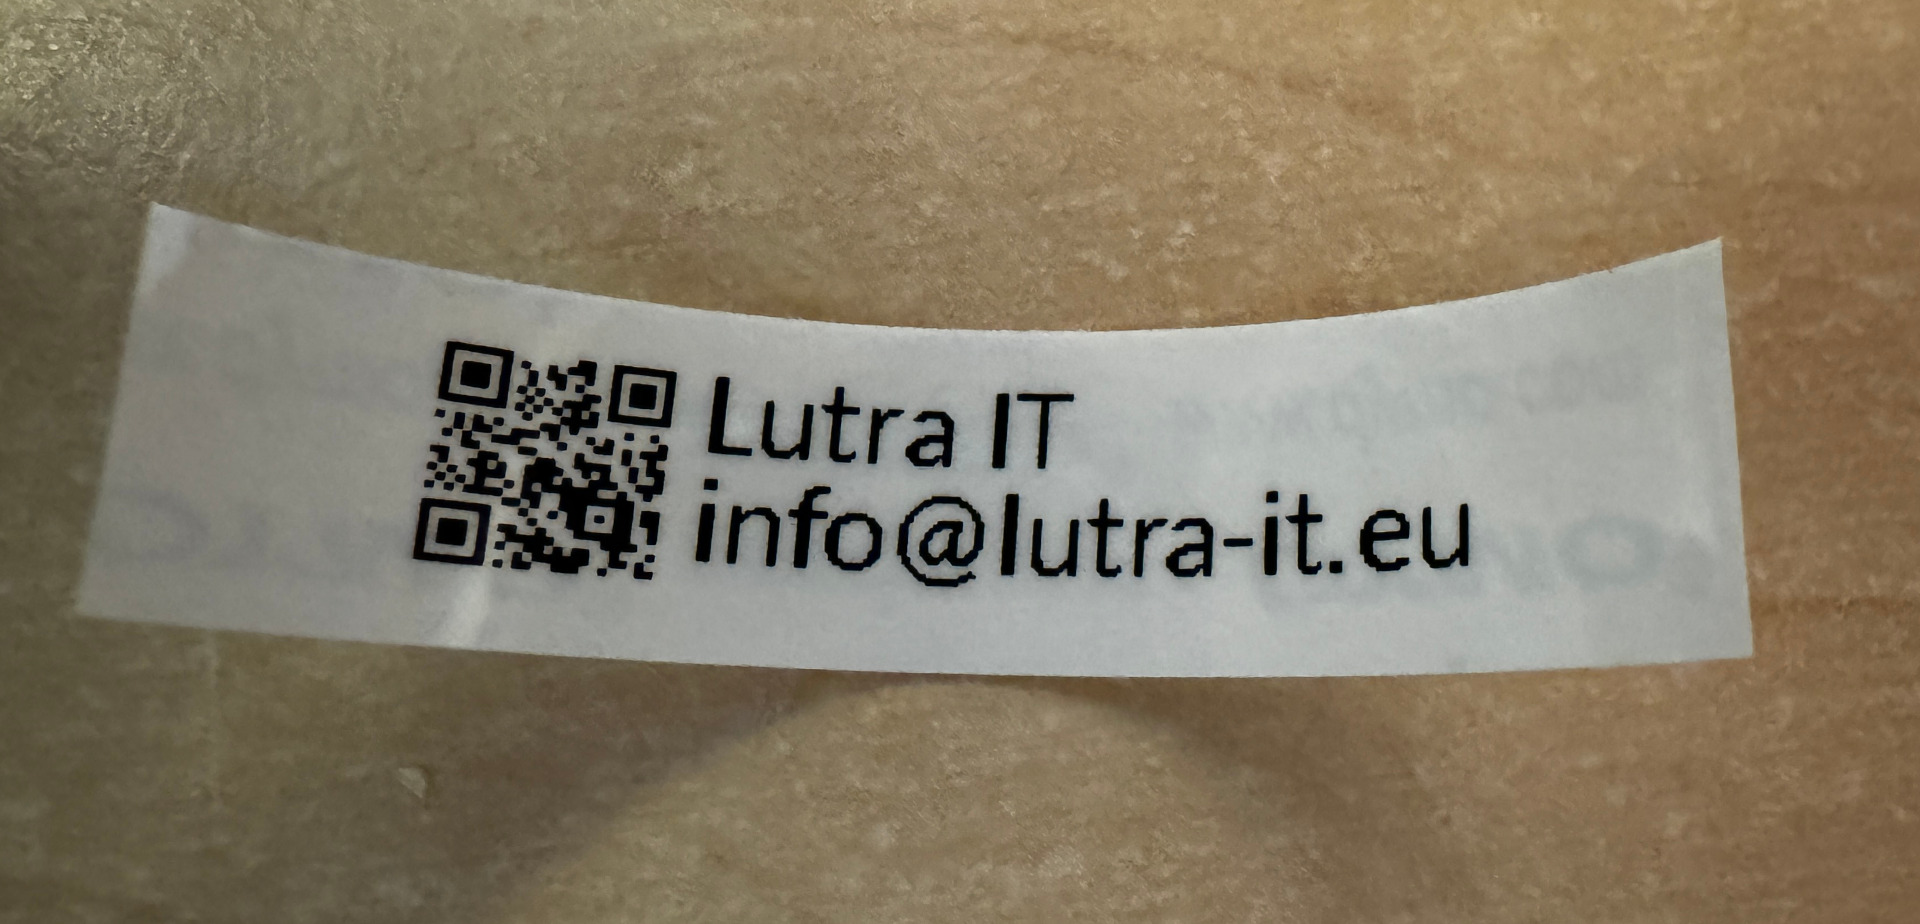 photo of label with QRcode on it